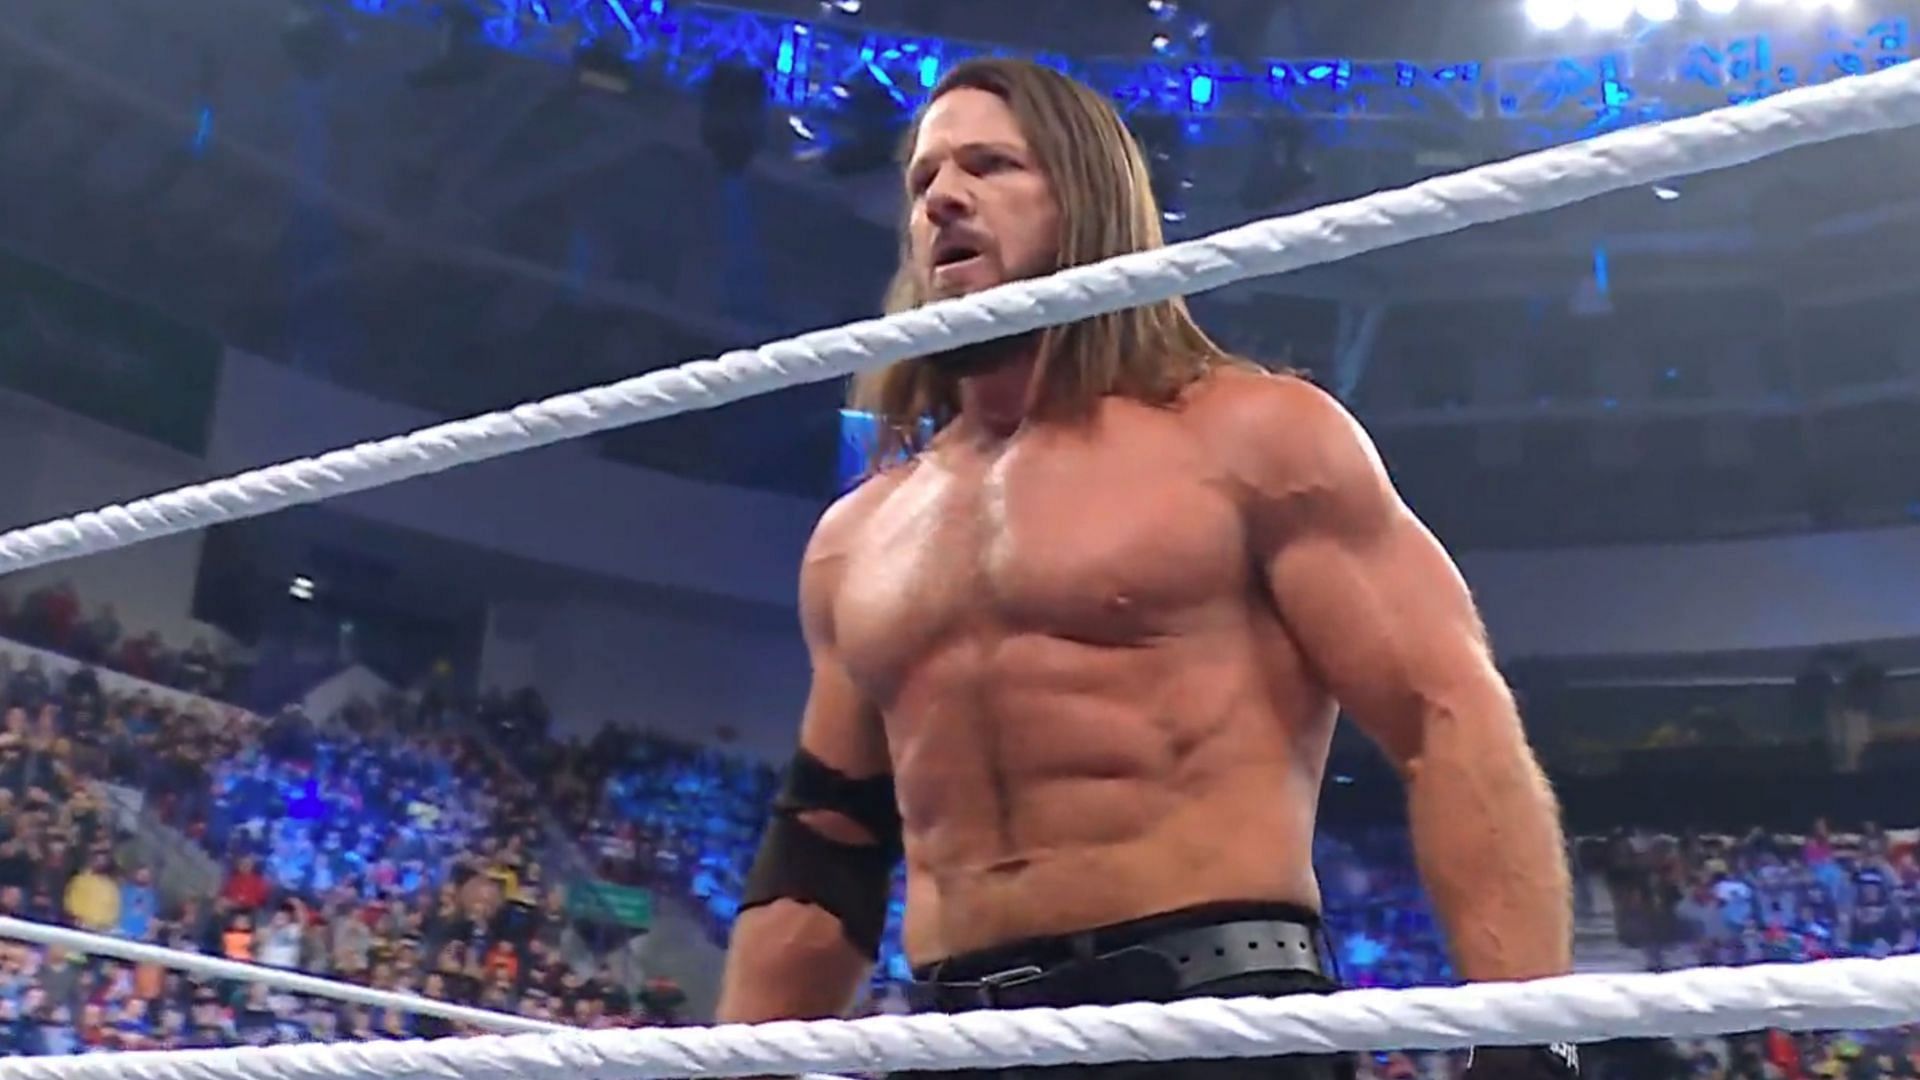 AJ Styles returned to WWE after two months of absence